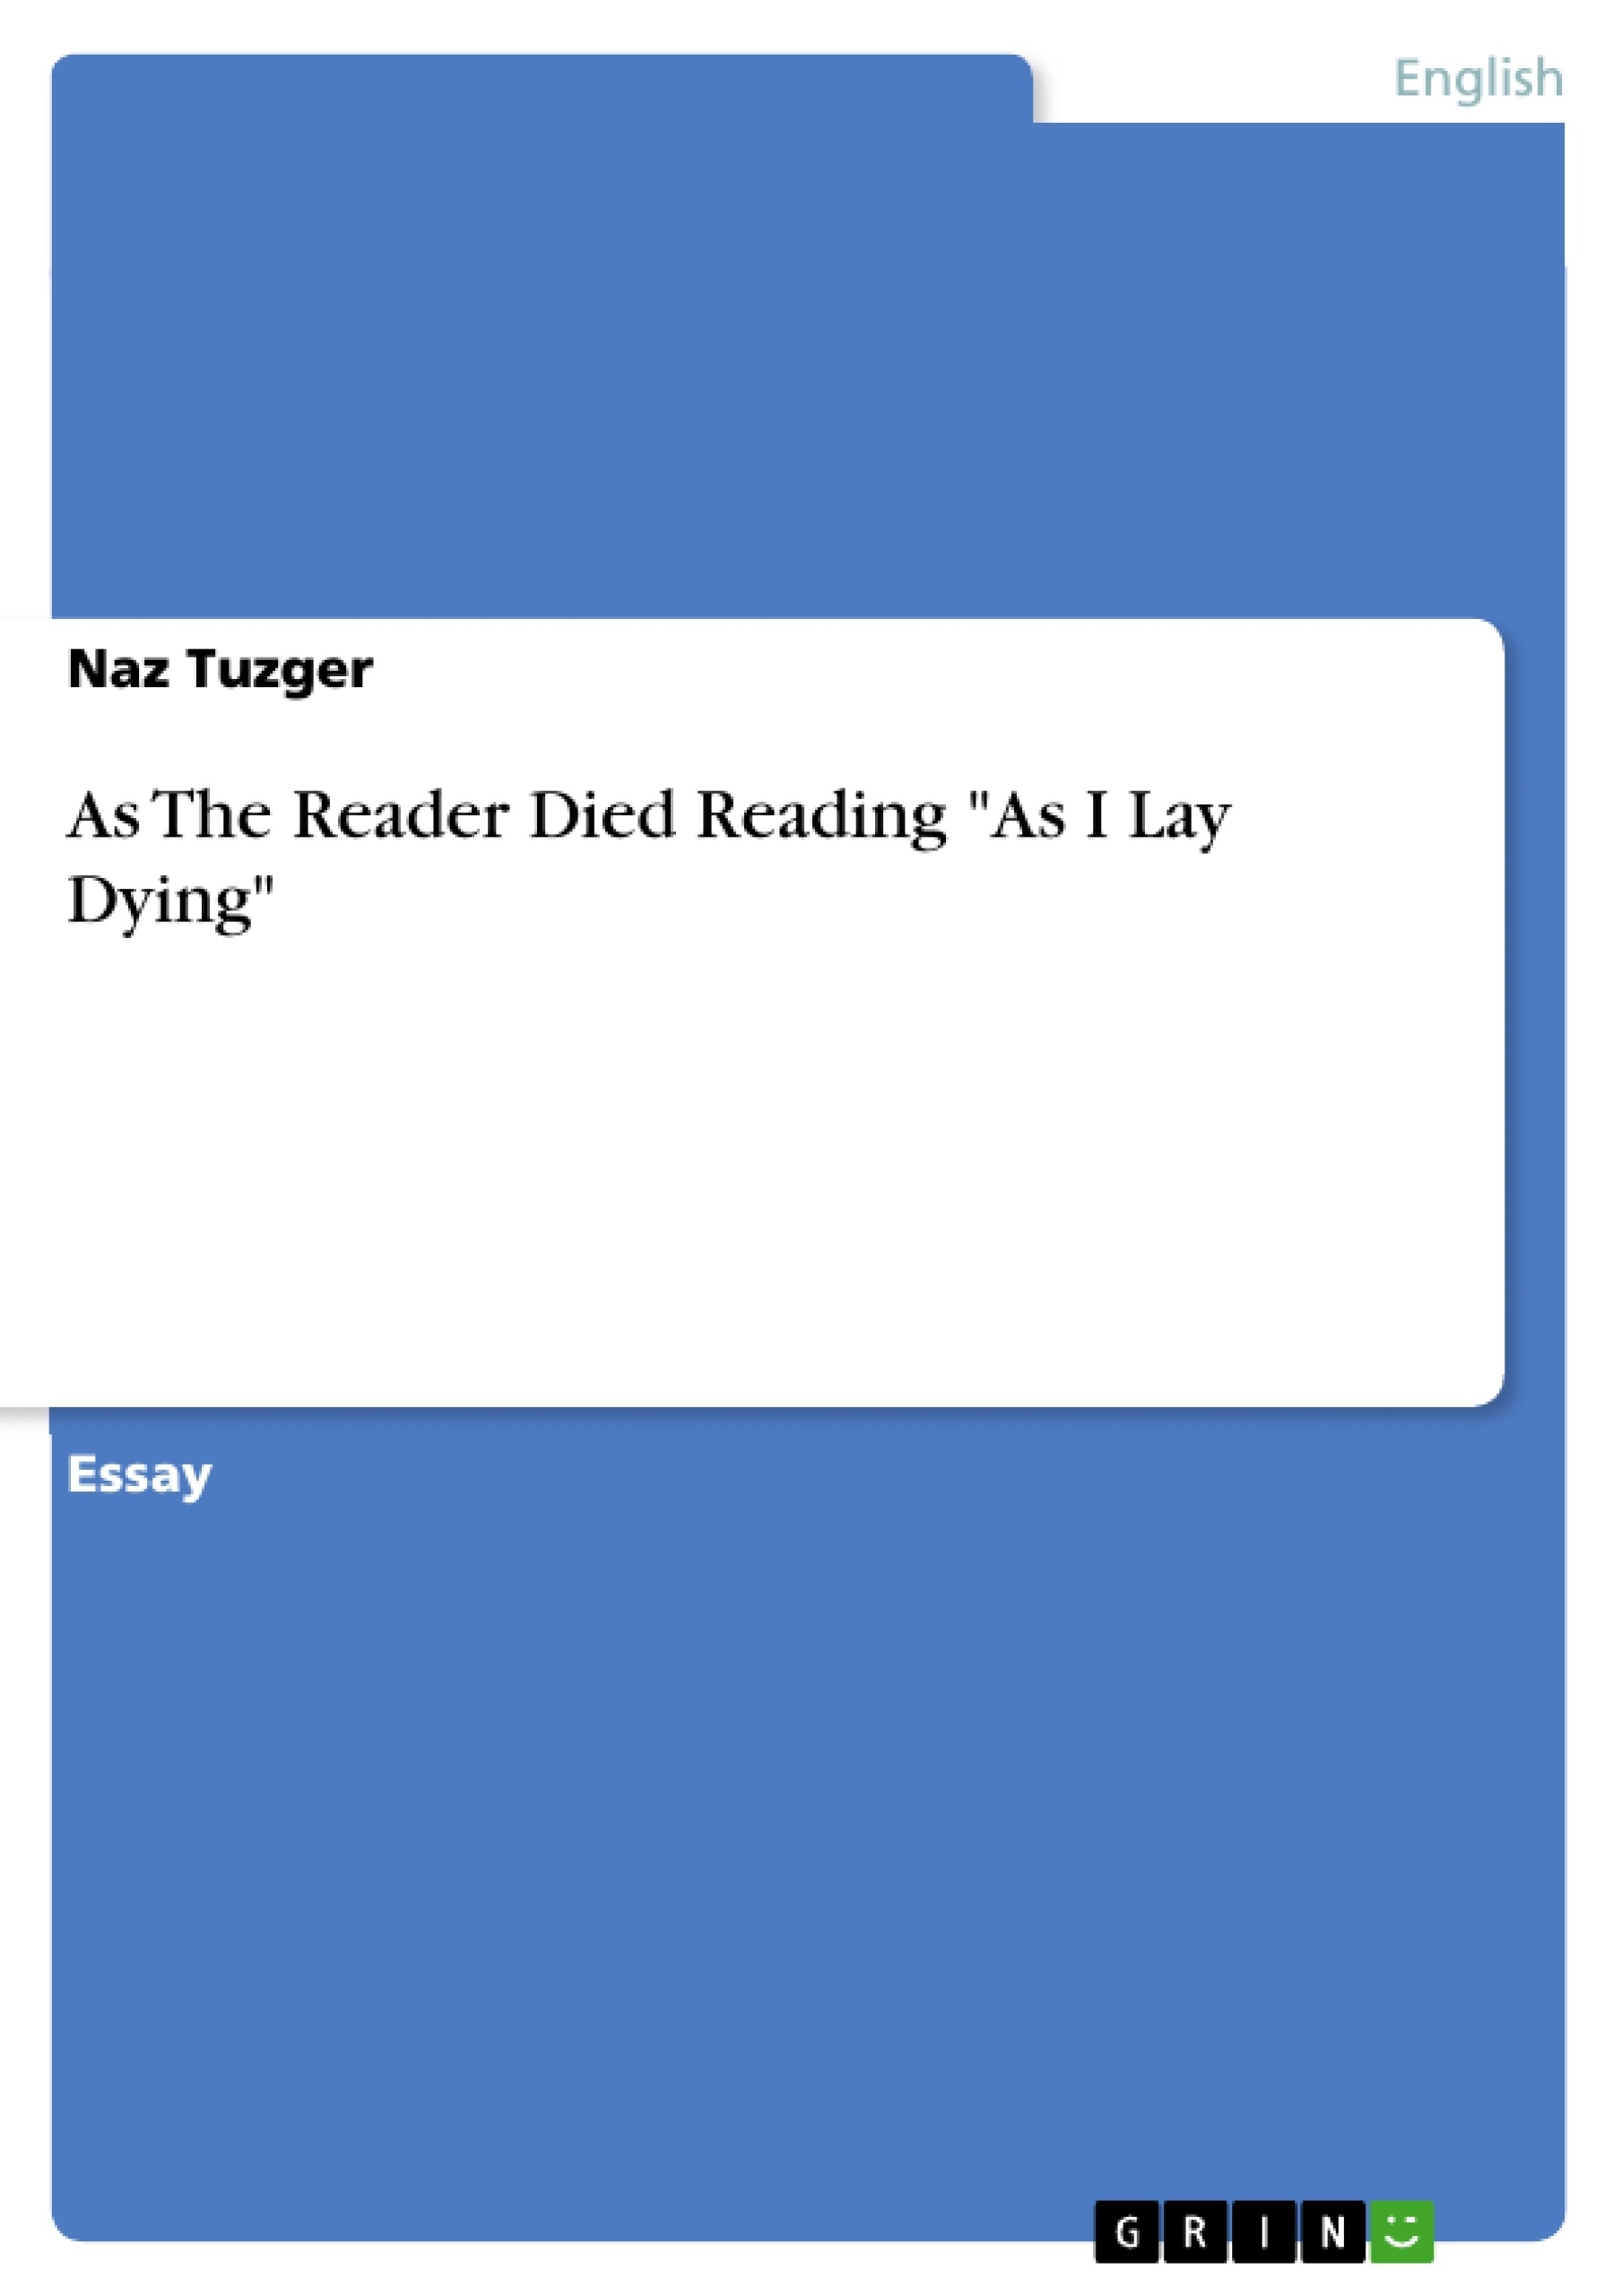 Titre: As The Reader Died Reading "As I Lay Dying"